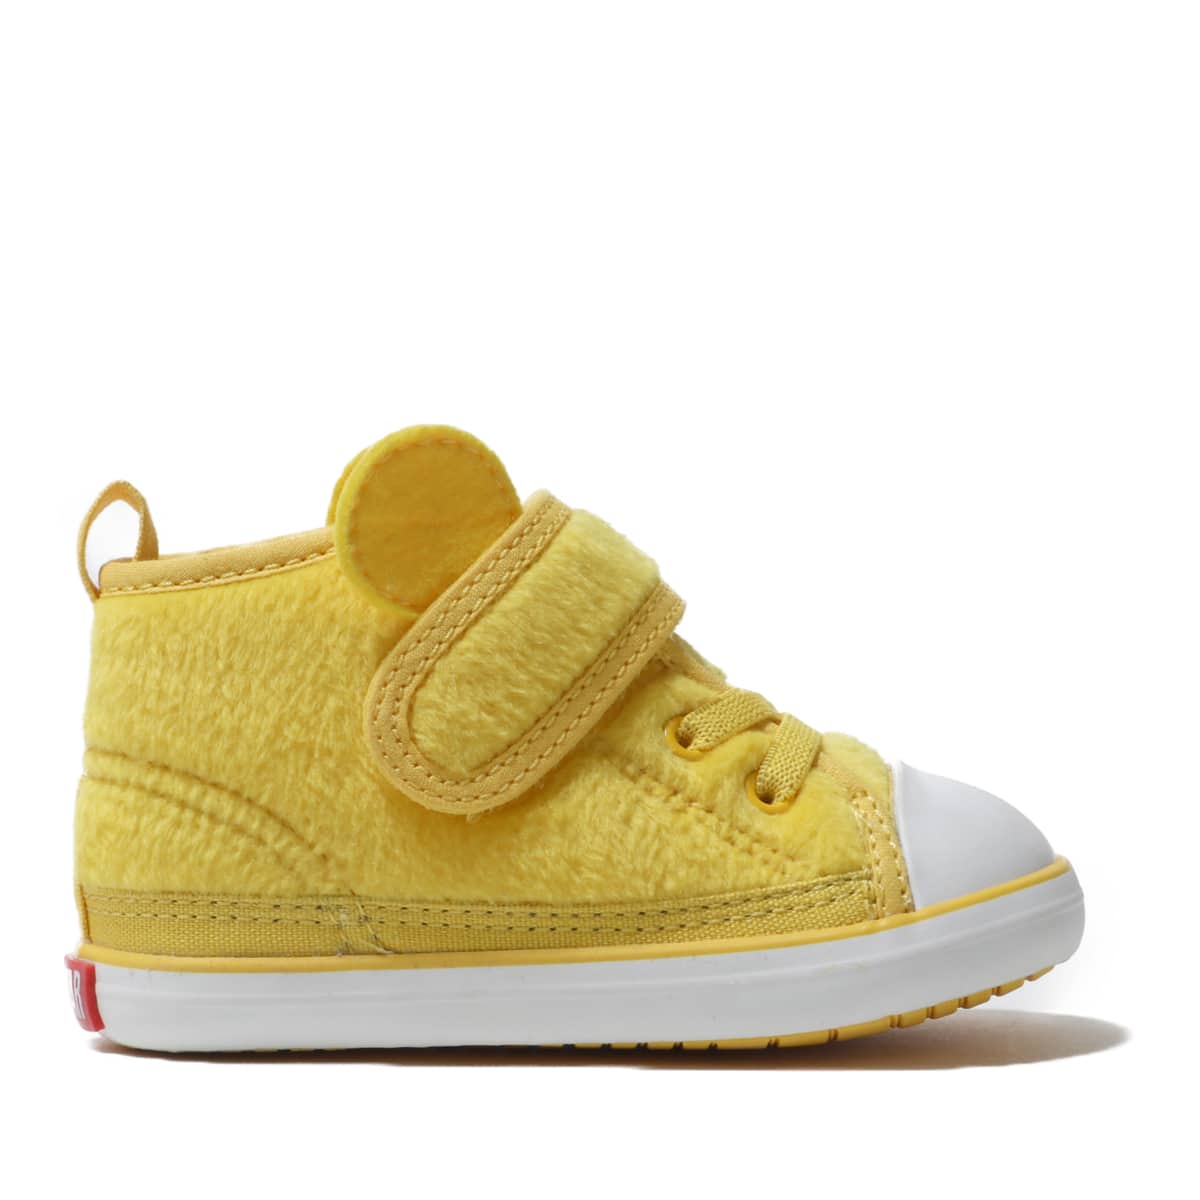 yellow converse youth